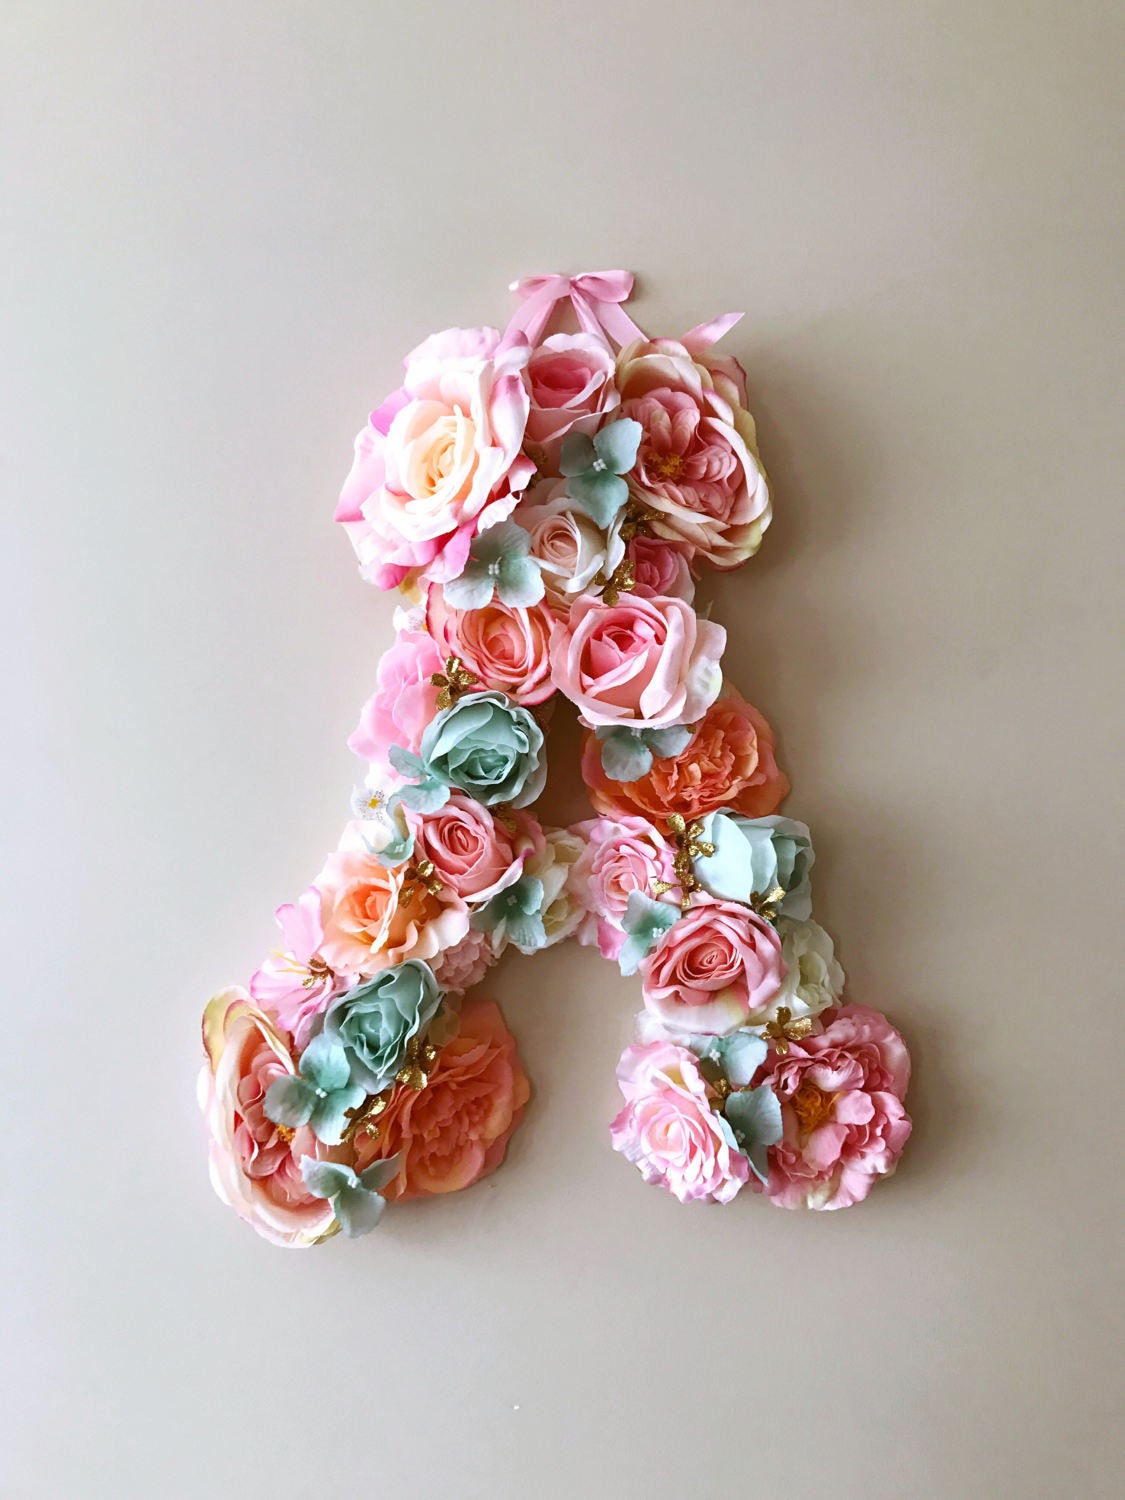 Nursery Letters, Flower girl gift, flower letters, Floral letters, Nursery decor, Nursery wall letters, Baby shower gift, Photography Prop